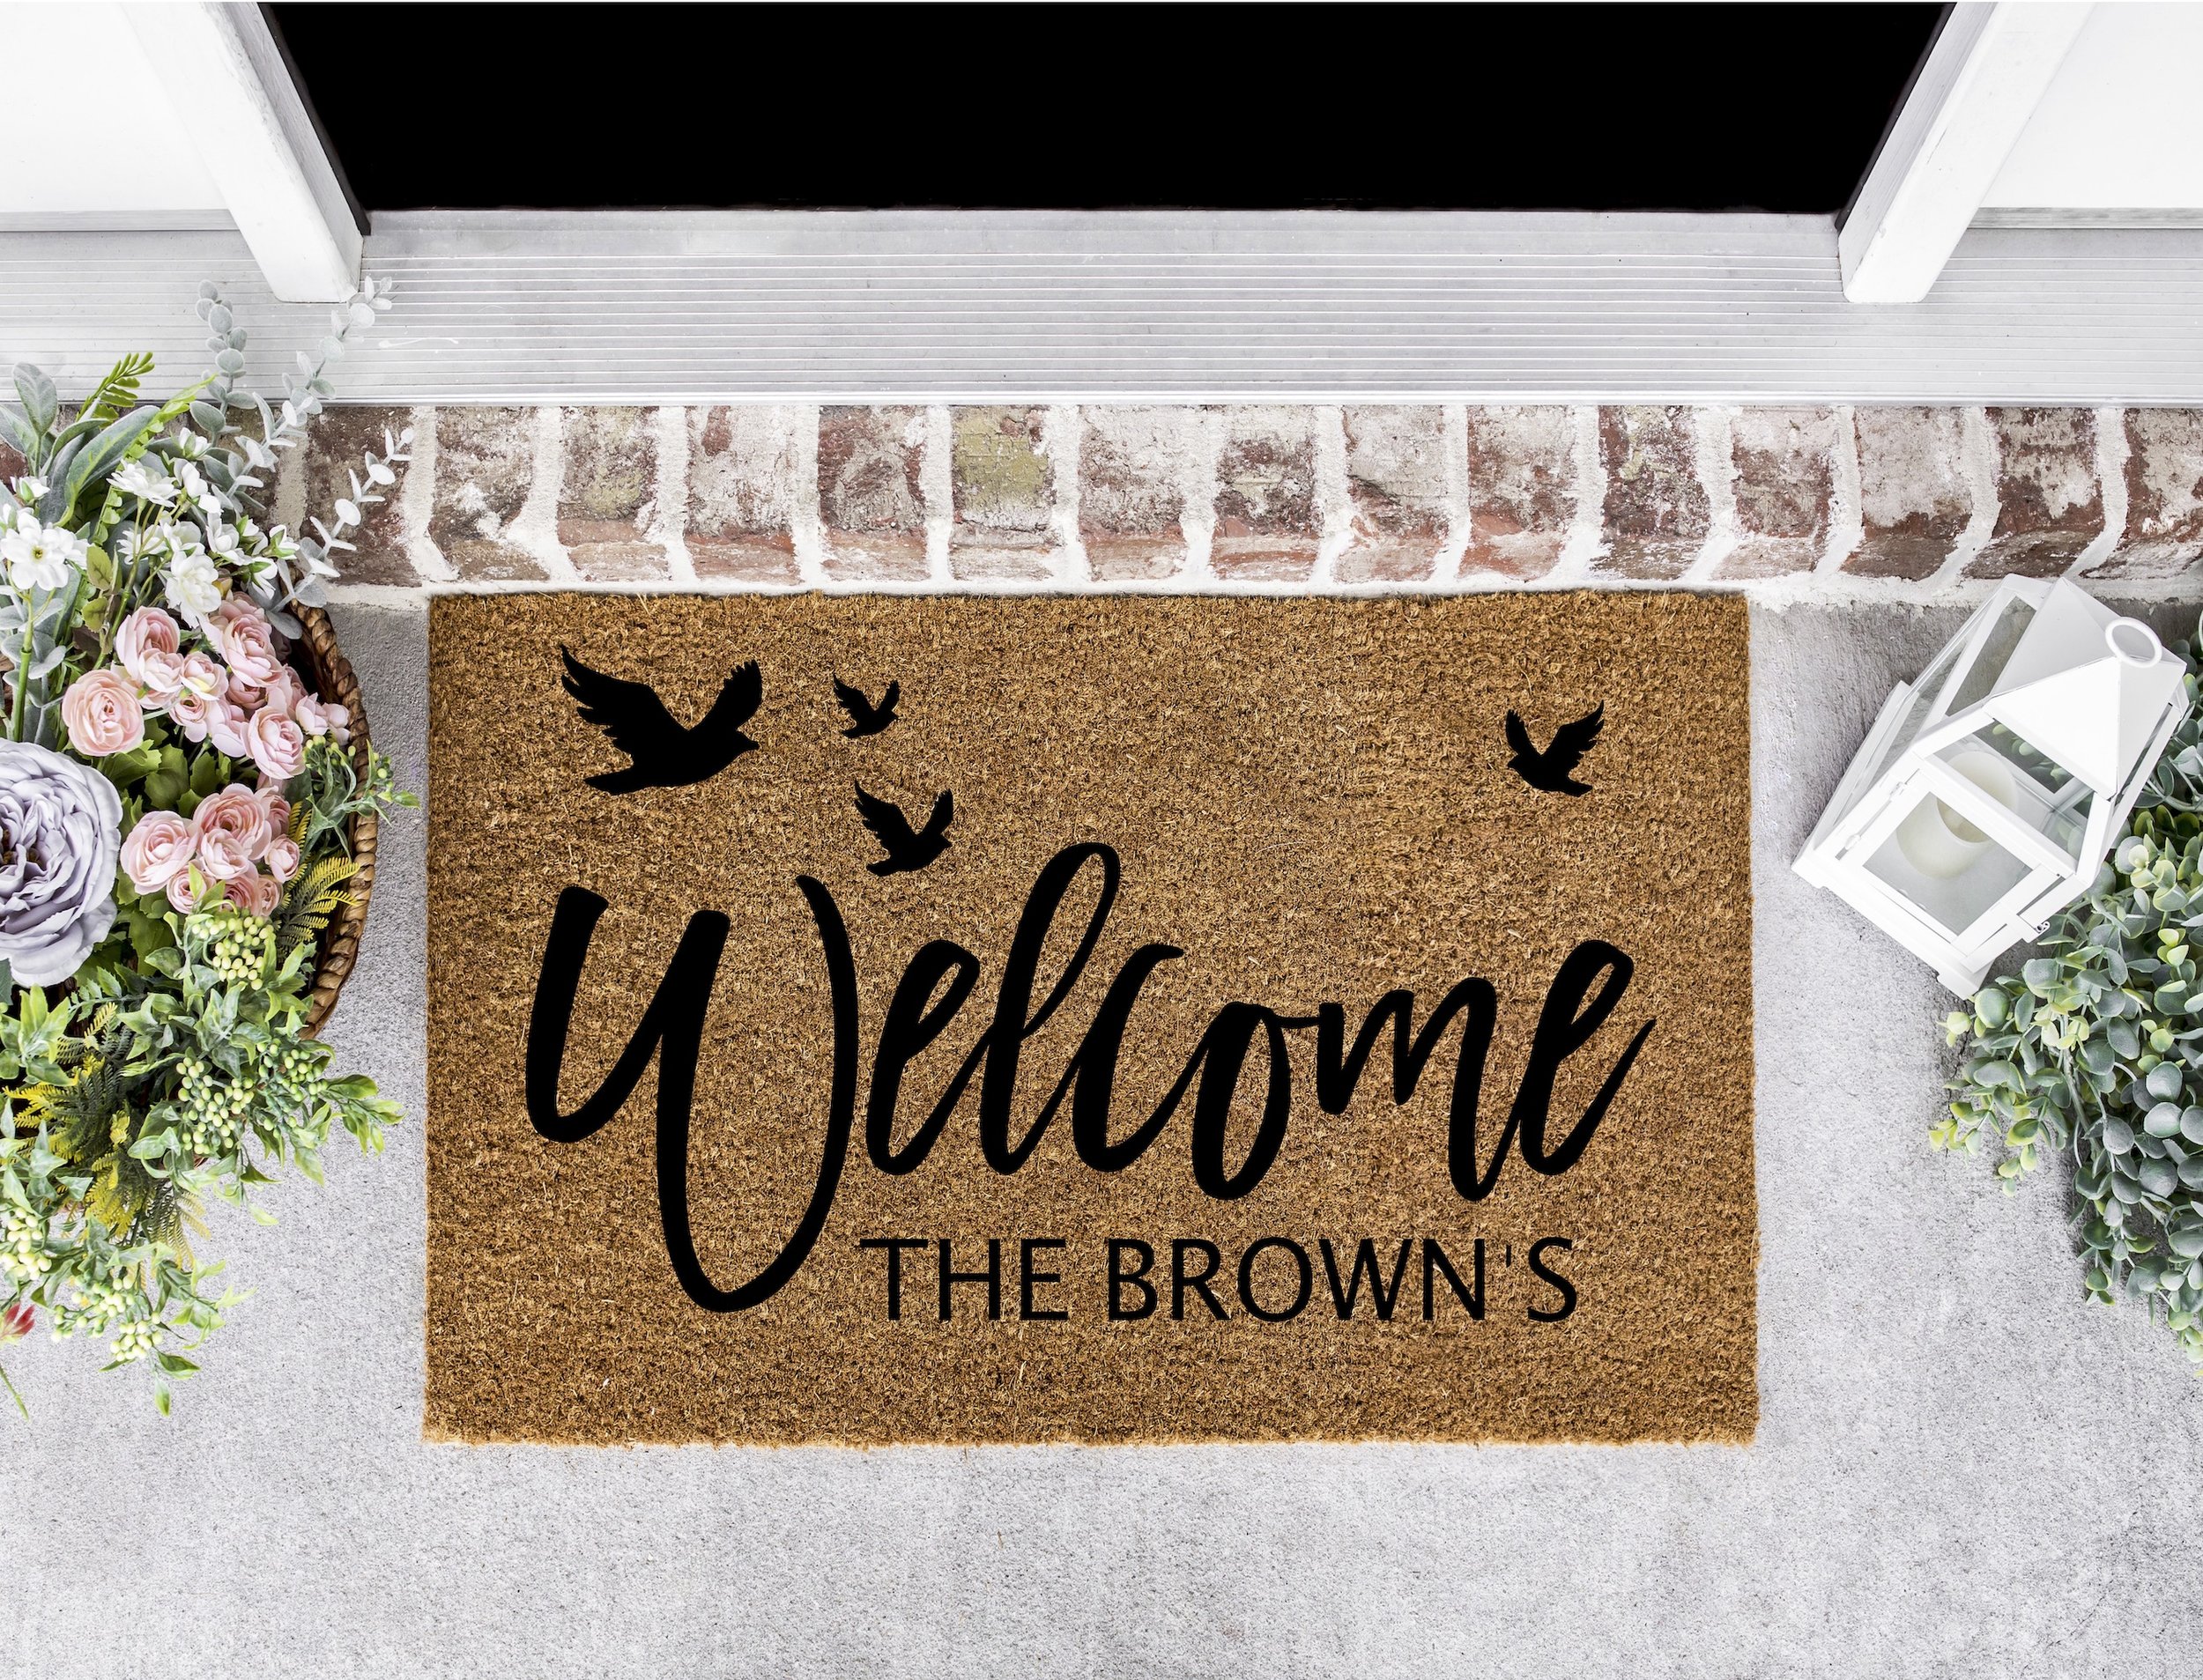 Welcome to the browns  doormat family name .jpg